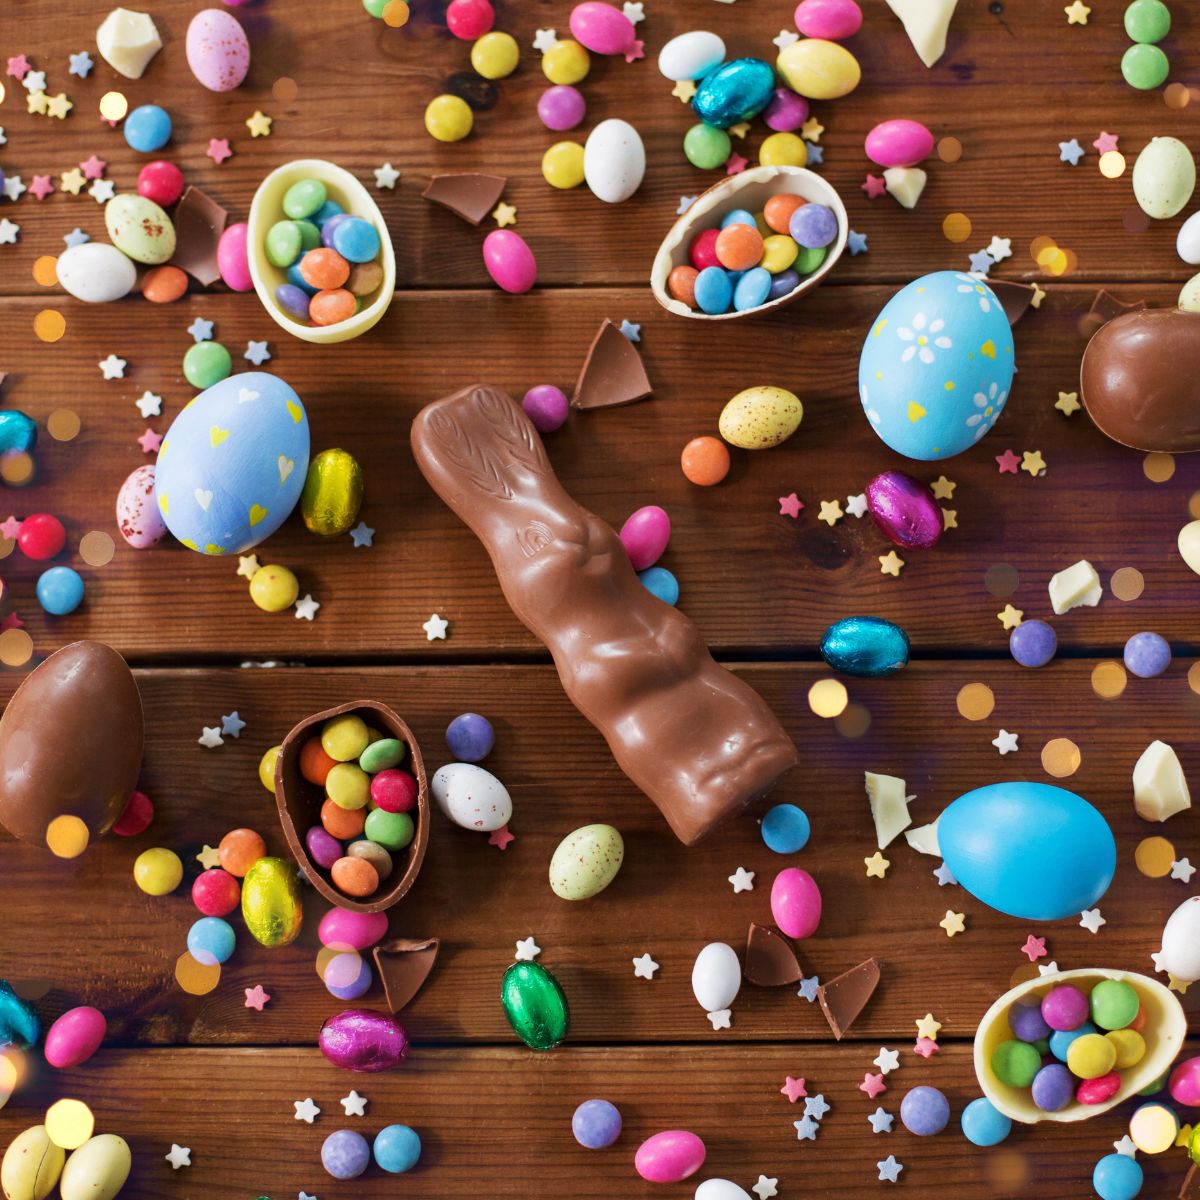 gluten free easter candy scattered on wooden planks